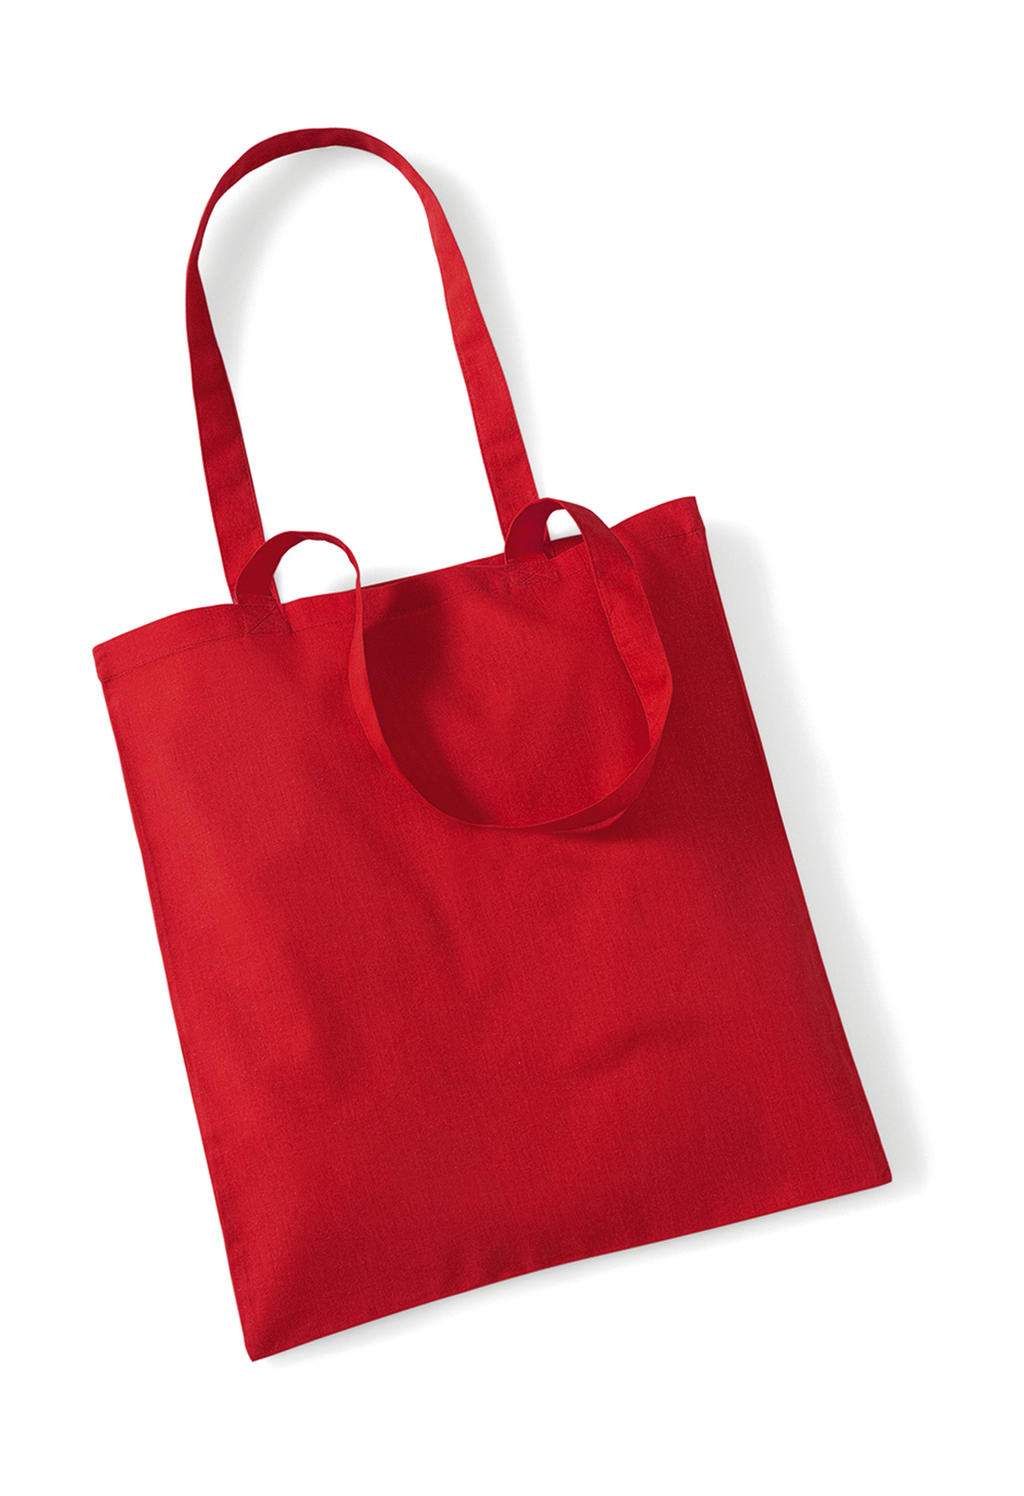  Bag for Life - Long Handles in Farbe Bright Red